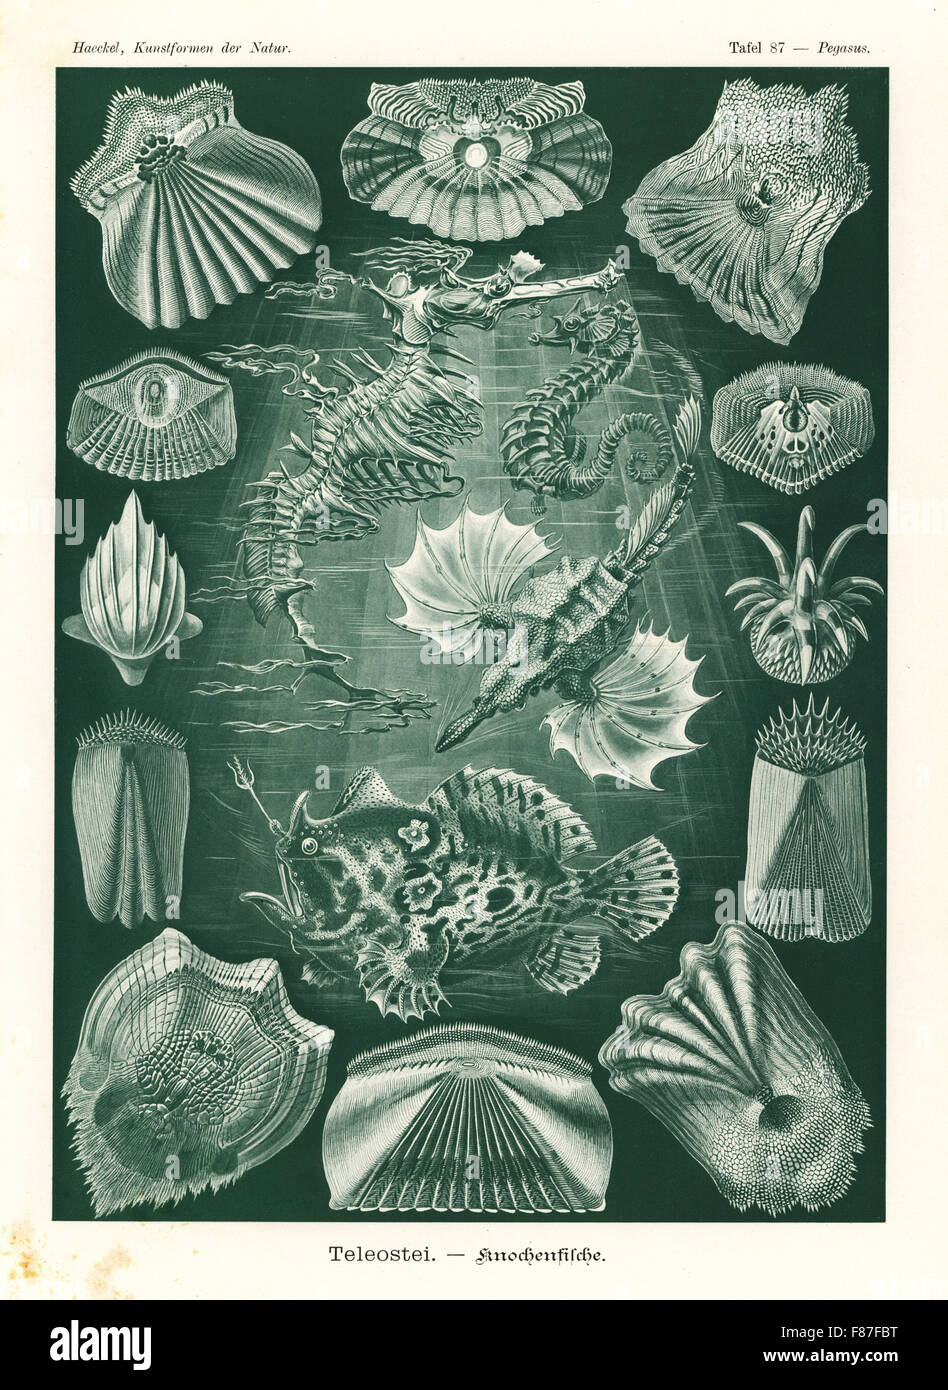 Teleostei or ray-finned fish: sea moth, Pegasus laternarius 1, short-snouted seahorse, Hippocampus hippocampus 2, leafy sea dragon, Phycodurus eques 3, Striated frogfish, Antennarius striatus 4, and various fish scales 5-16. Chromolithograph by Adolf Glitsch from an illustration by Ernst Haeckel from Art Forms in Nature, Kunstformen der Natur, Liepzig, Germany, 1904. Stock Photo